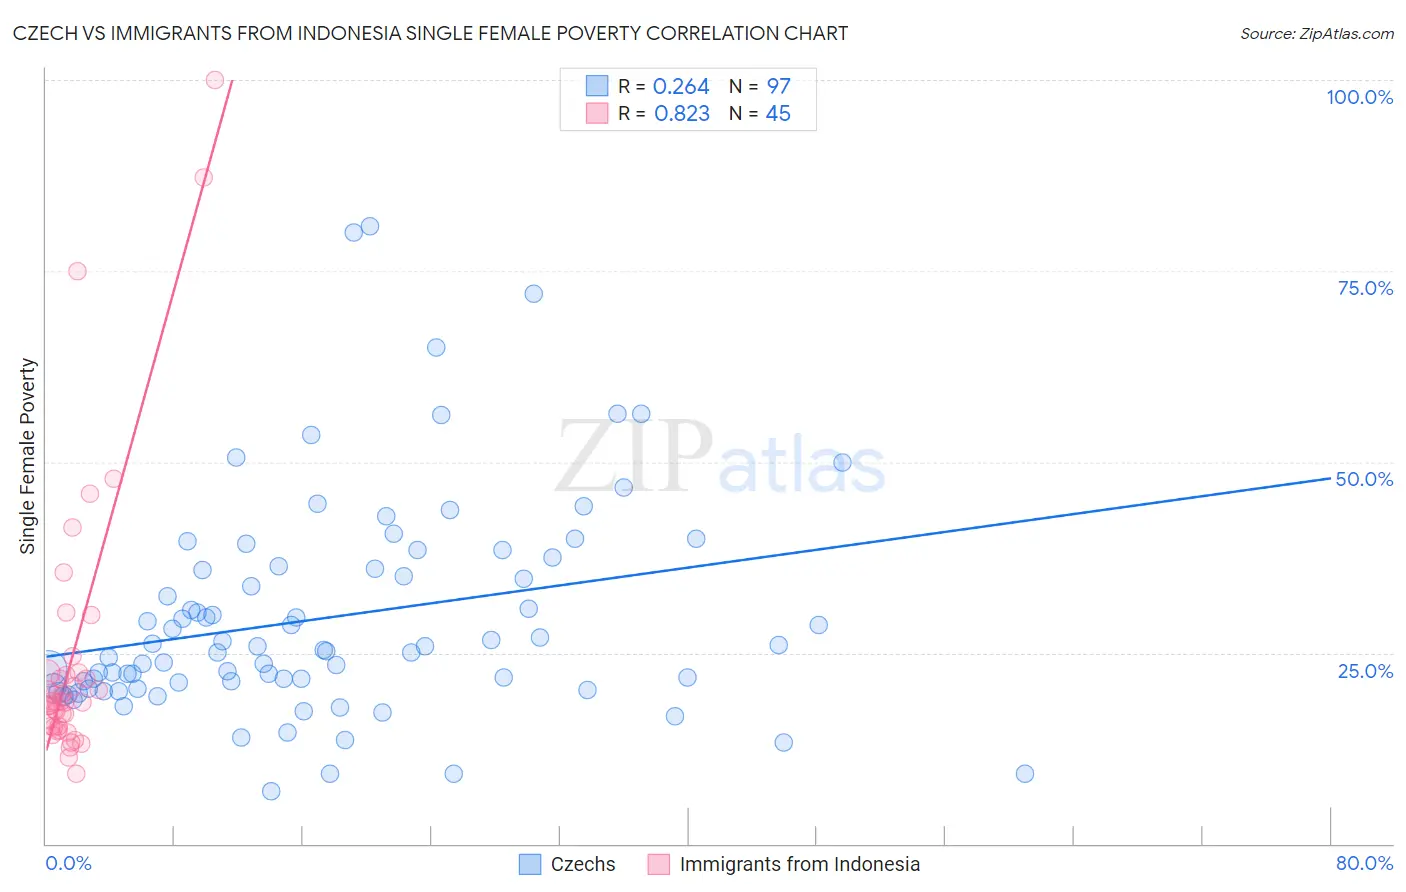 Czech vs Immigrants from Indonesia Single Female Poverty